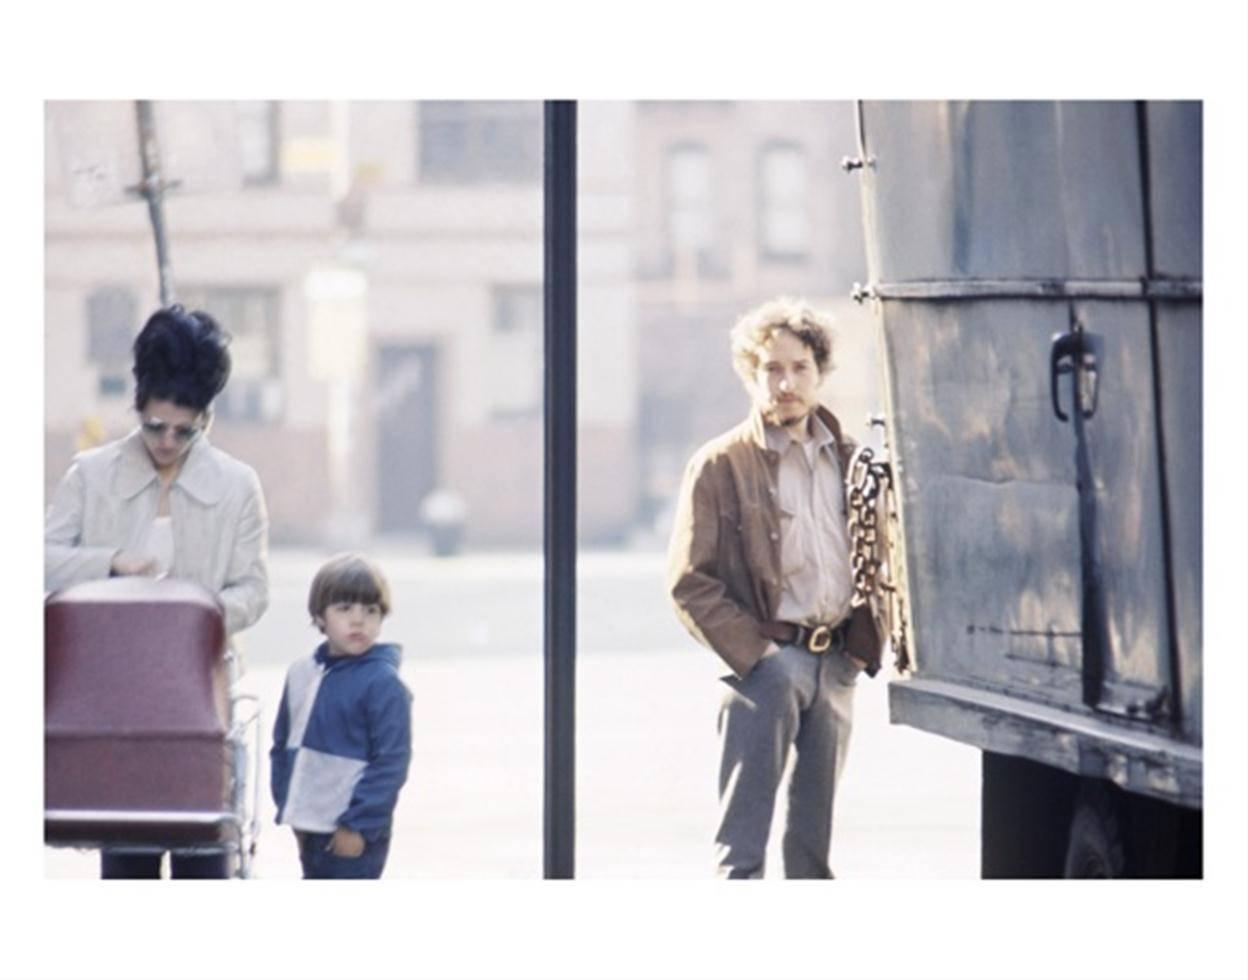 John Cohen Portrait Photograph - Bob Dylan, On Street With Woman, Child and Baby Carriage, 1970